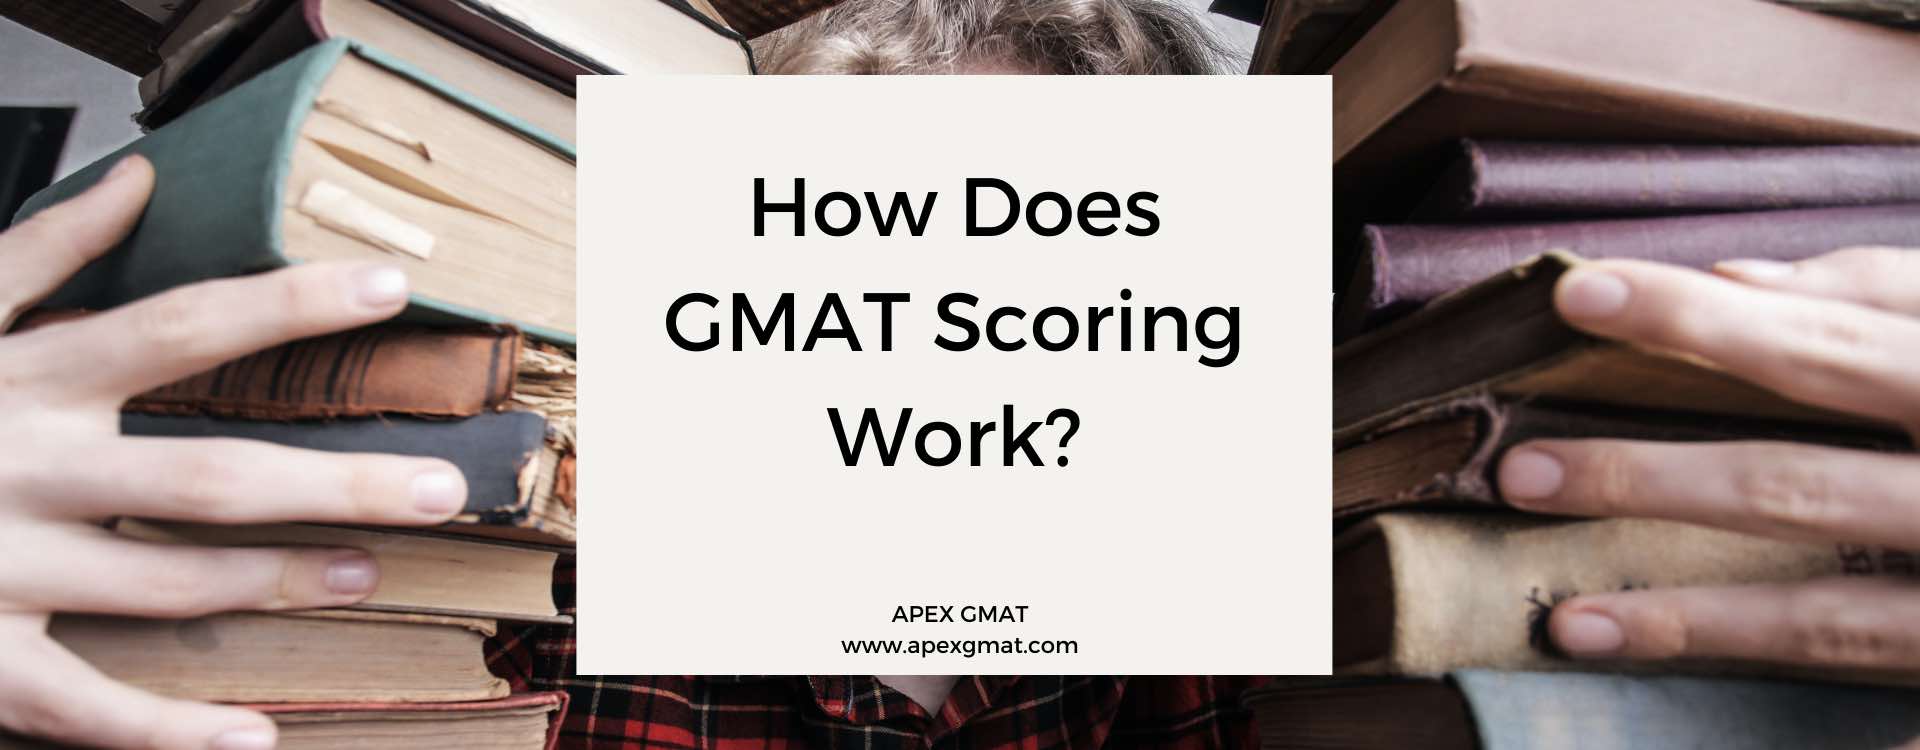 How Does GMAT Scoring Work?